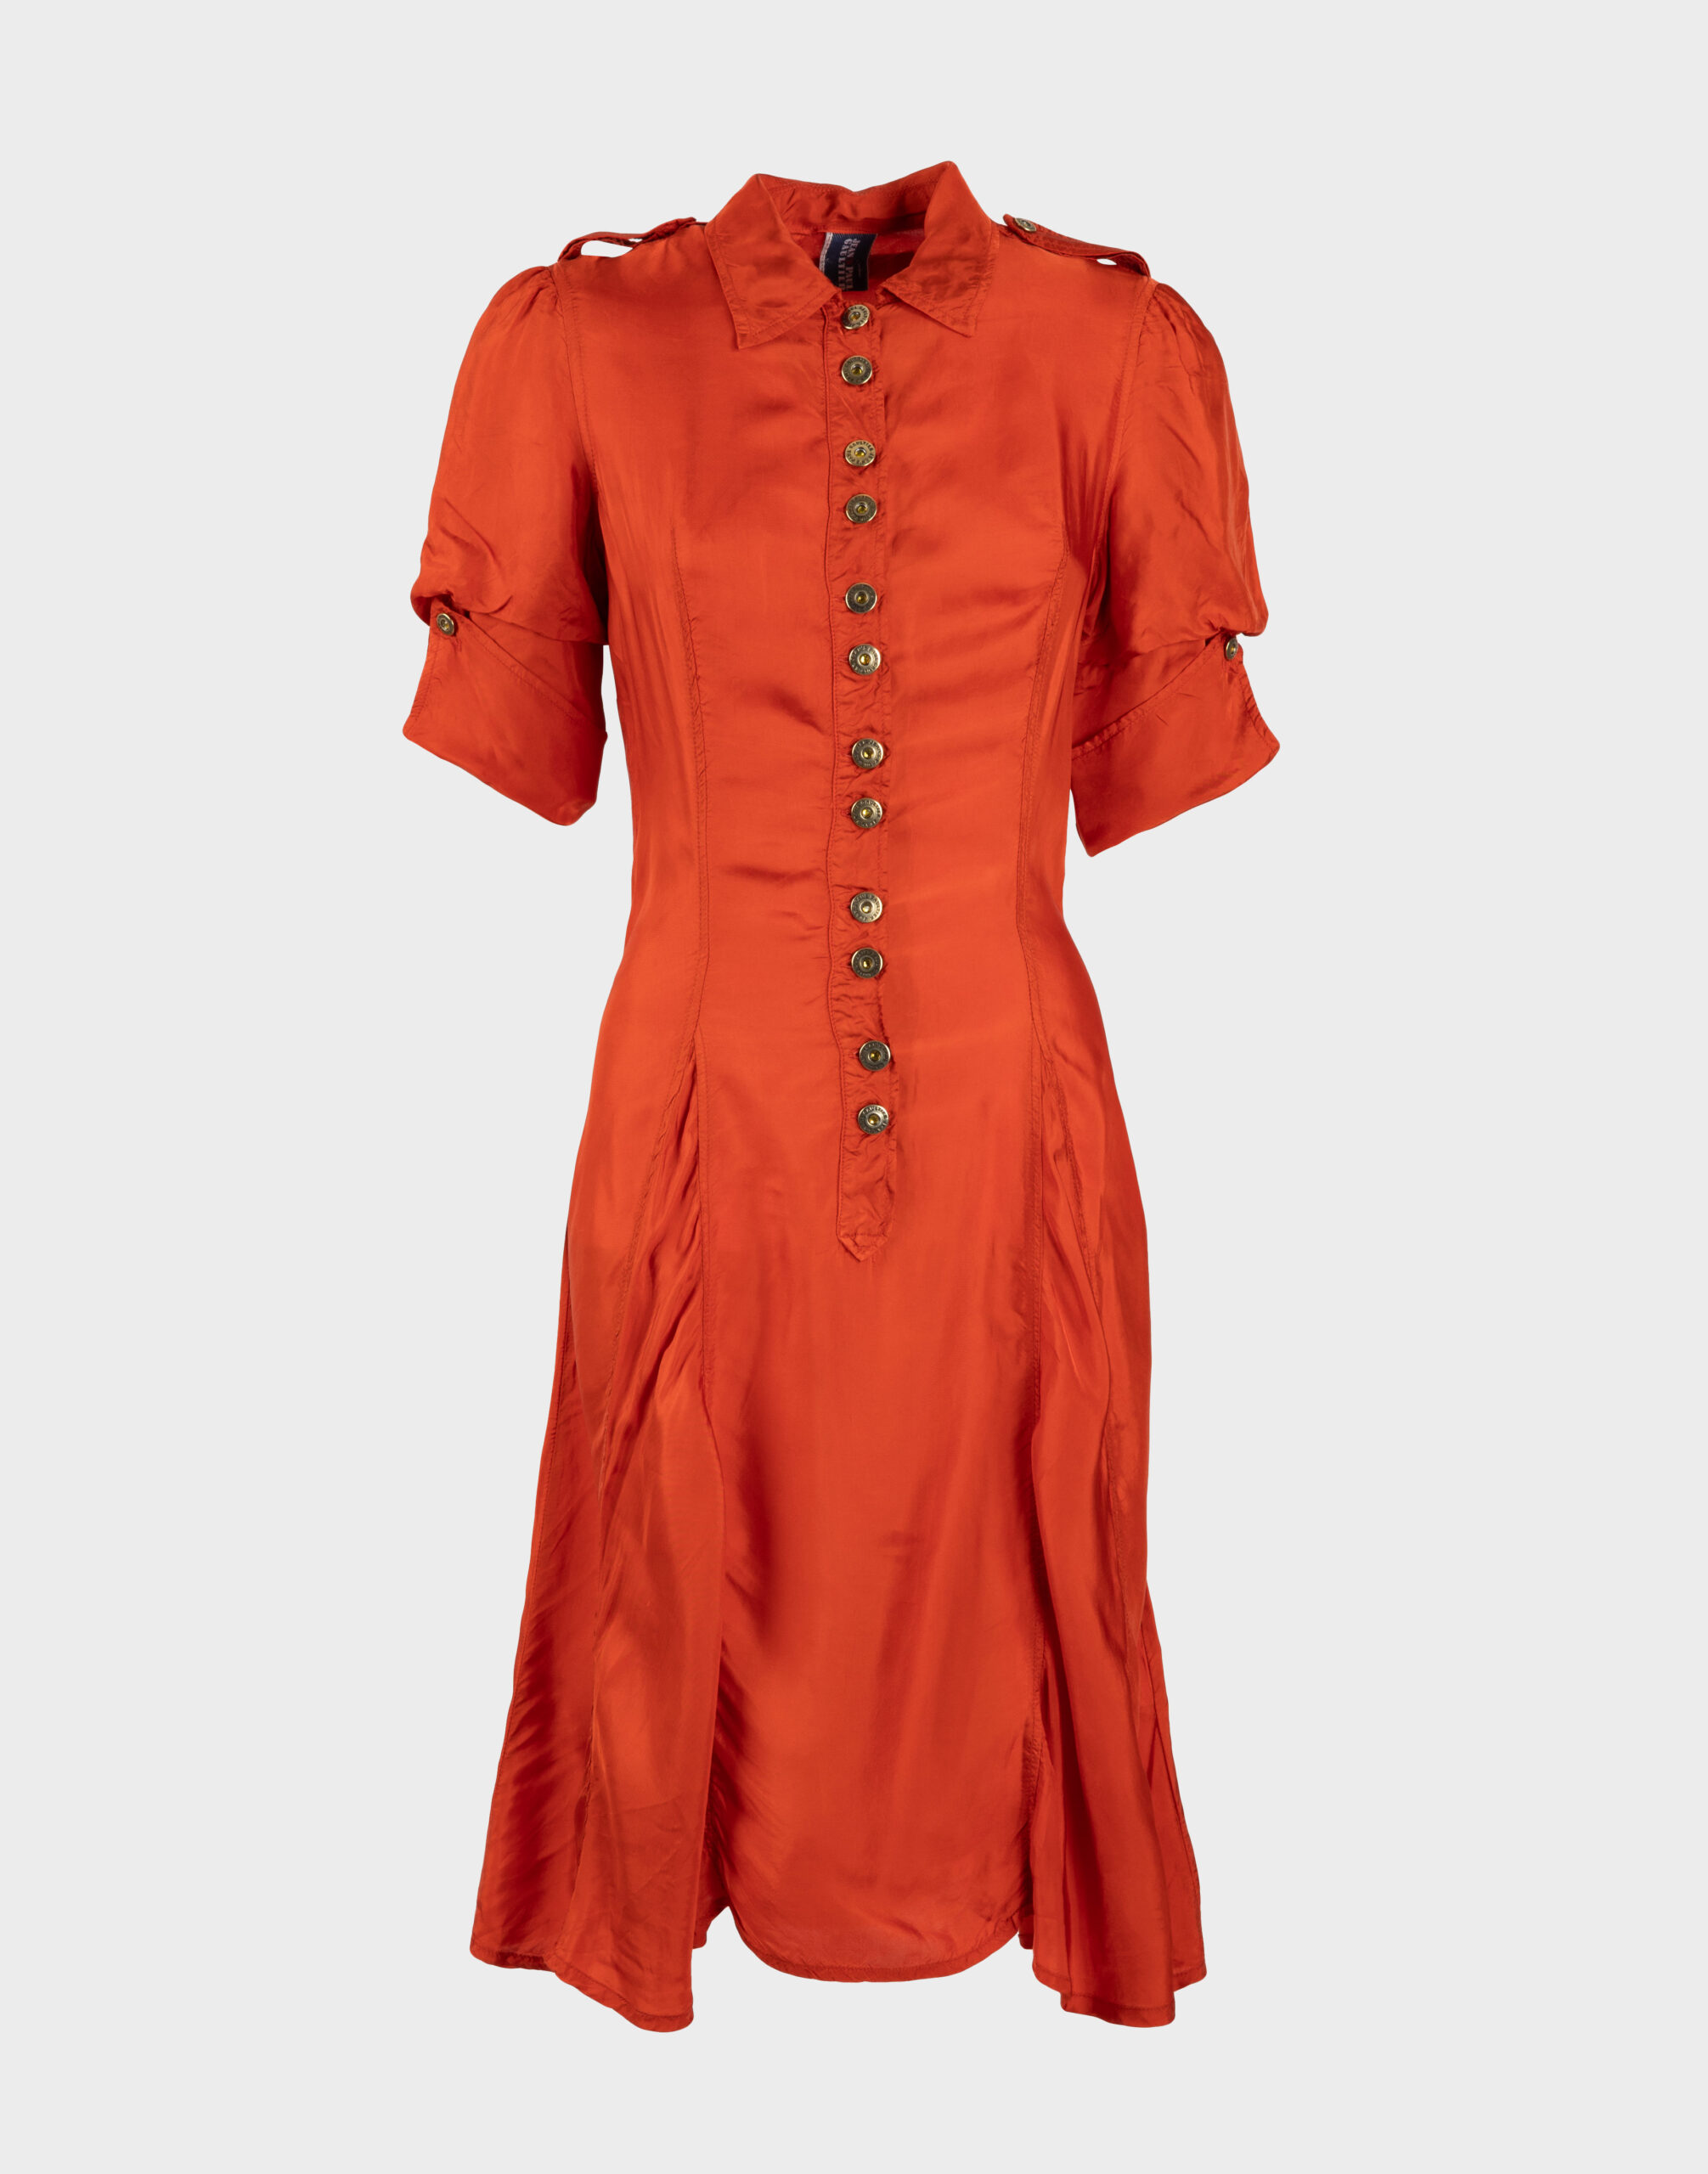 orange midi dress with balloon sleeves, front button fastening and flared skirt